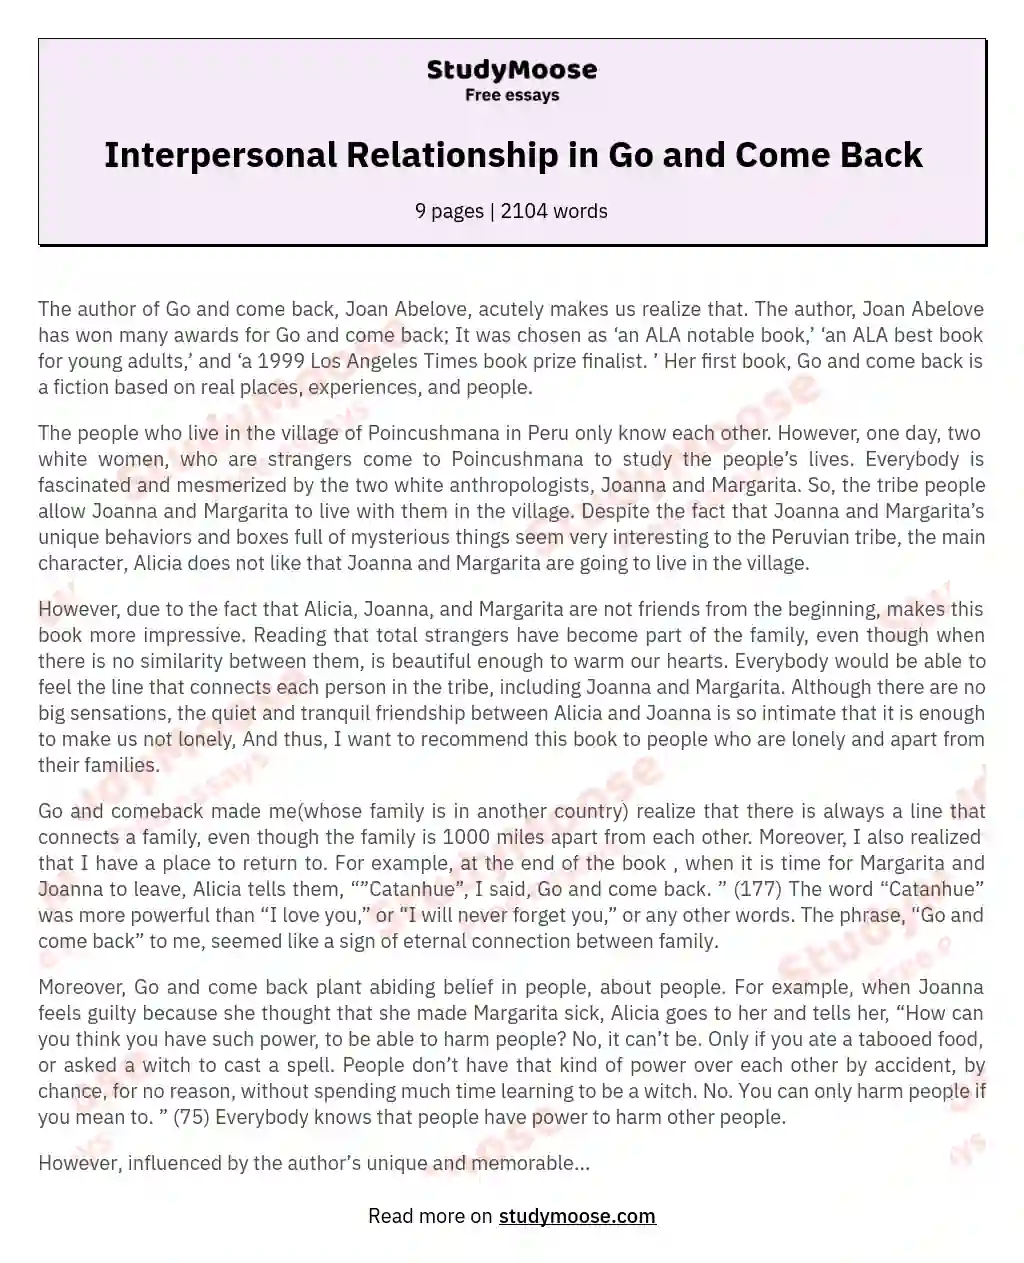 Interpersonal Relationship in Go and Come Back